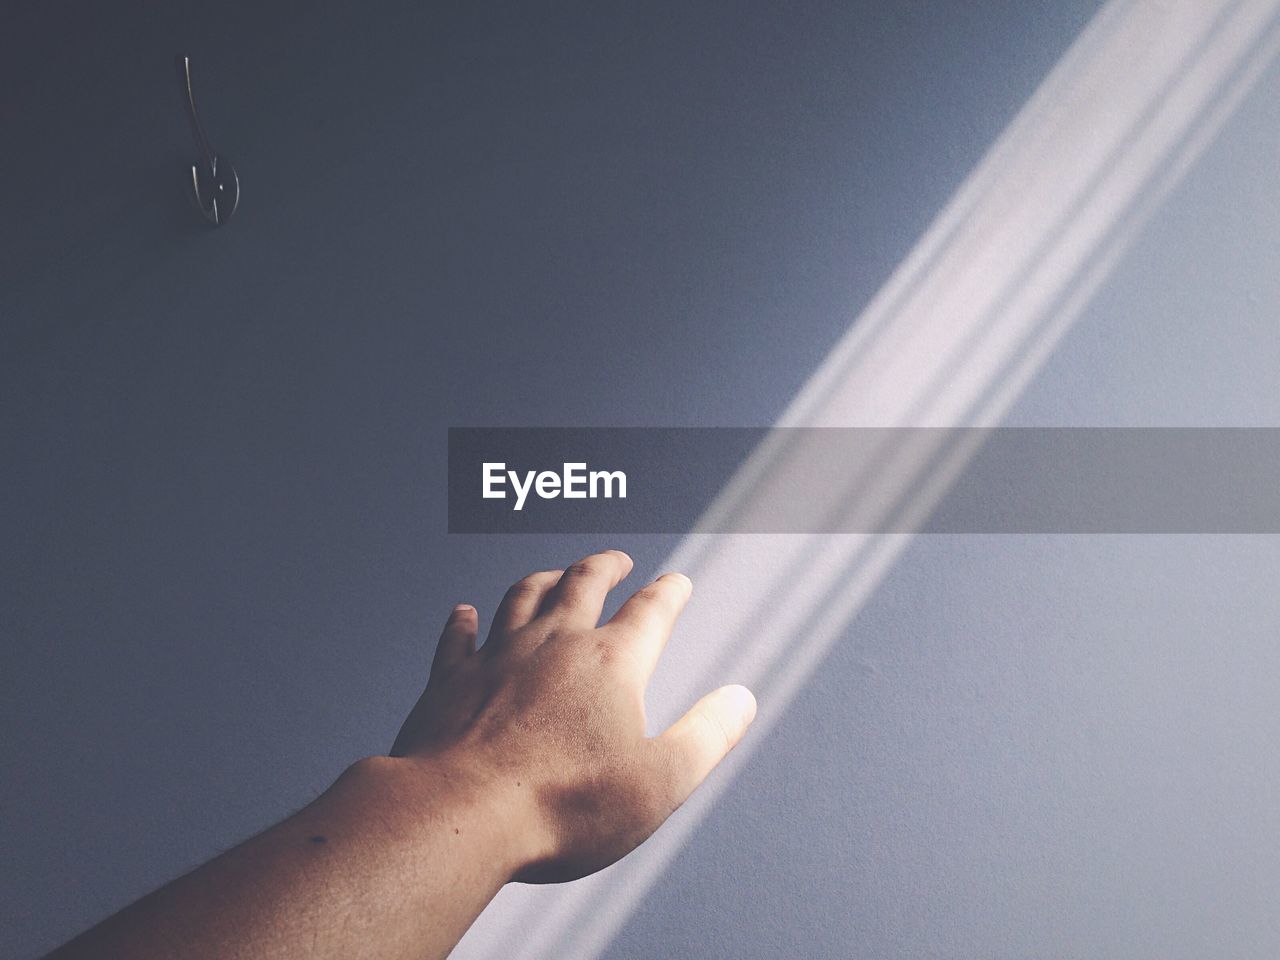 Cropped image of person touching sunlight falling on wall